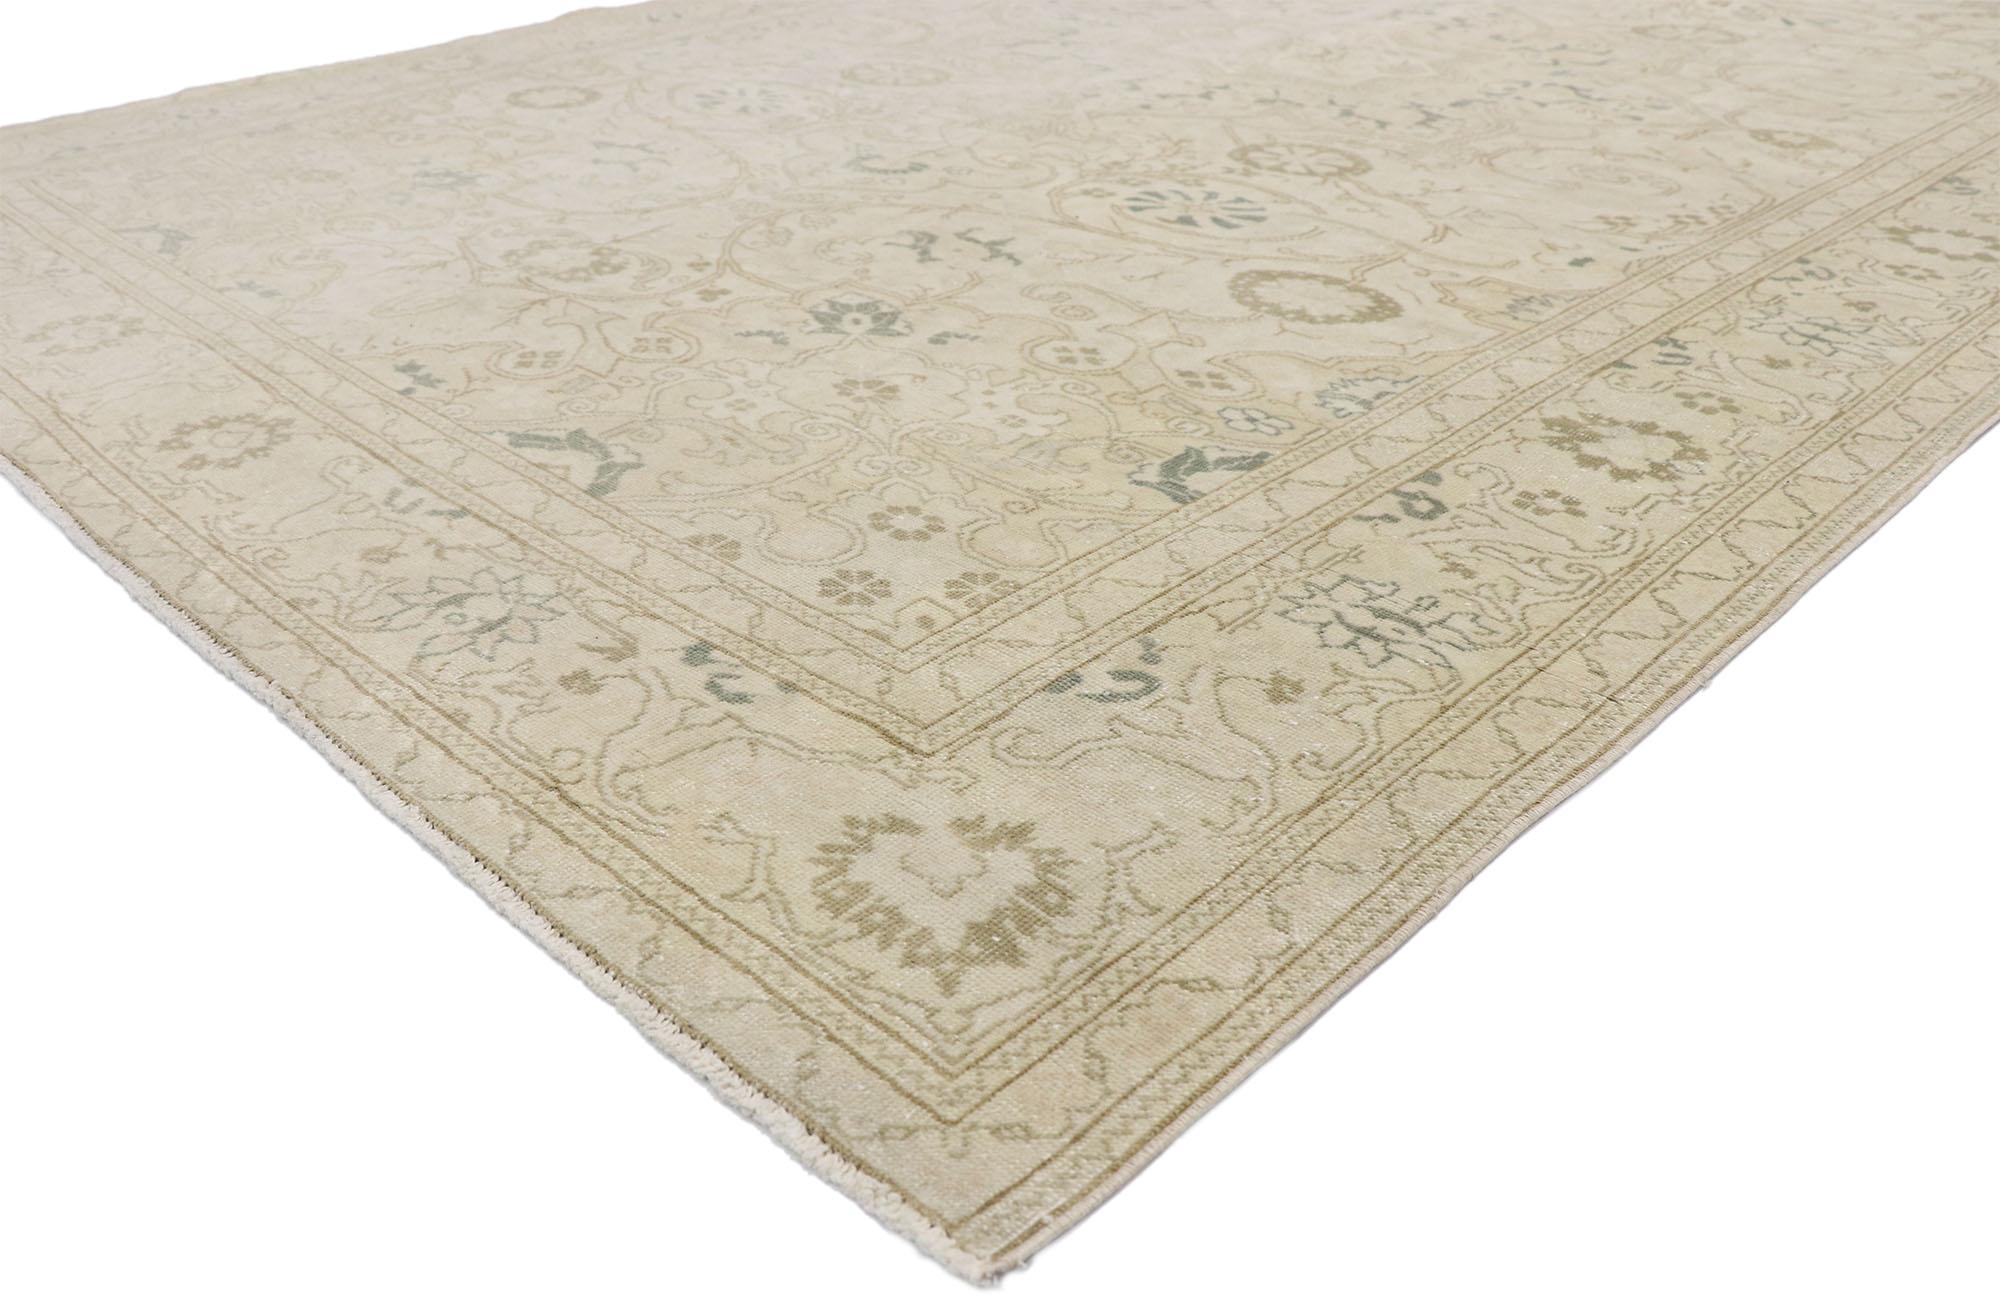 52659, distressed vintage Turkish Sivas rug with modern rustic Cotswold Cottage style. With its soft, subtle hues and cozy simplicity, this hand knotted wool distressed vintage Turkish Sivas rug charms with ease and beautifully embodies Cotswold